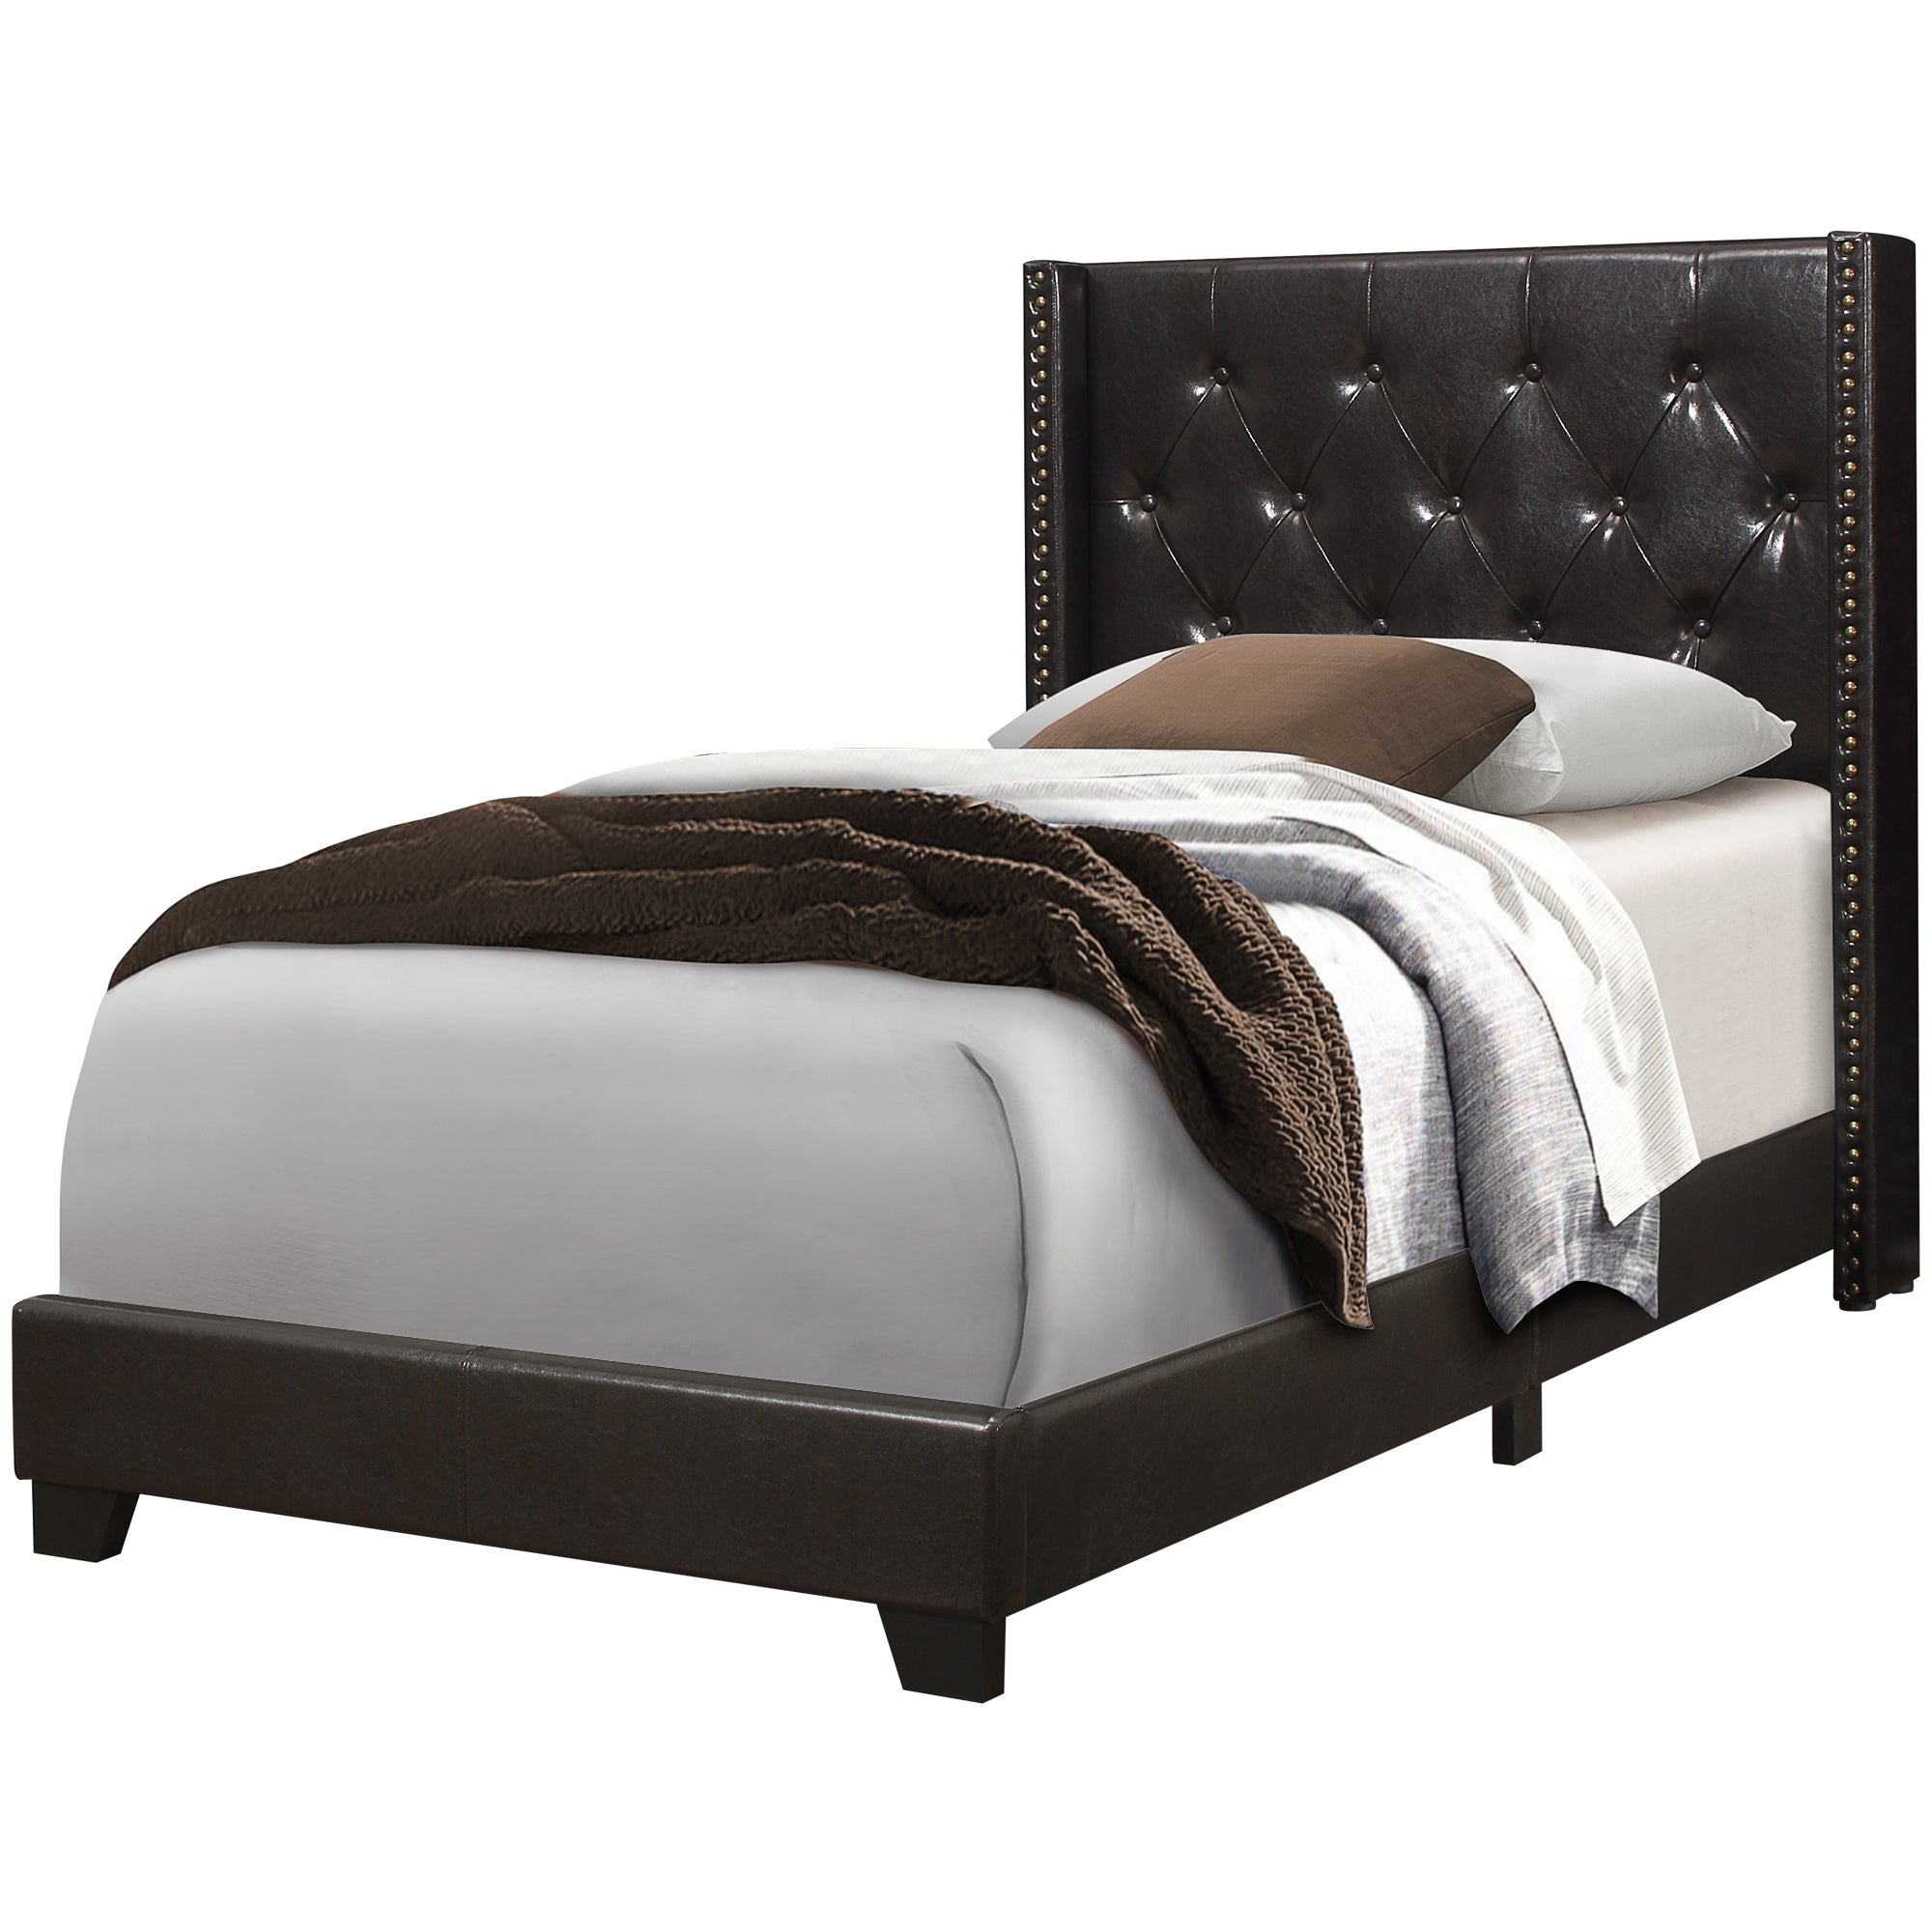 Bed - Twin Size / Brown Leather-Look With Brass Trim